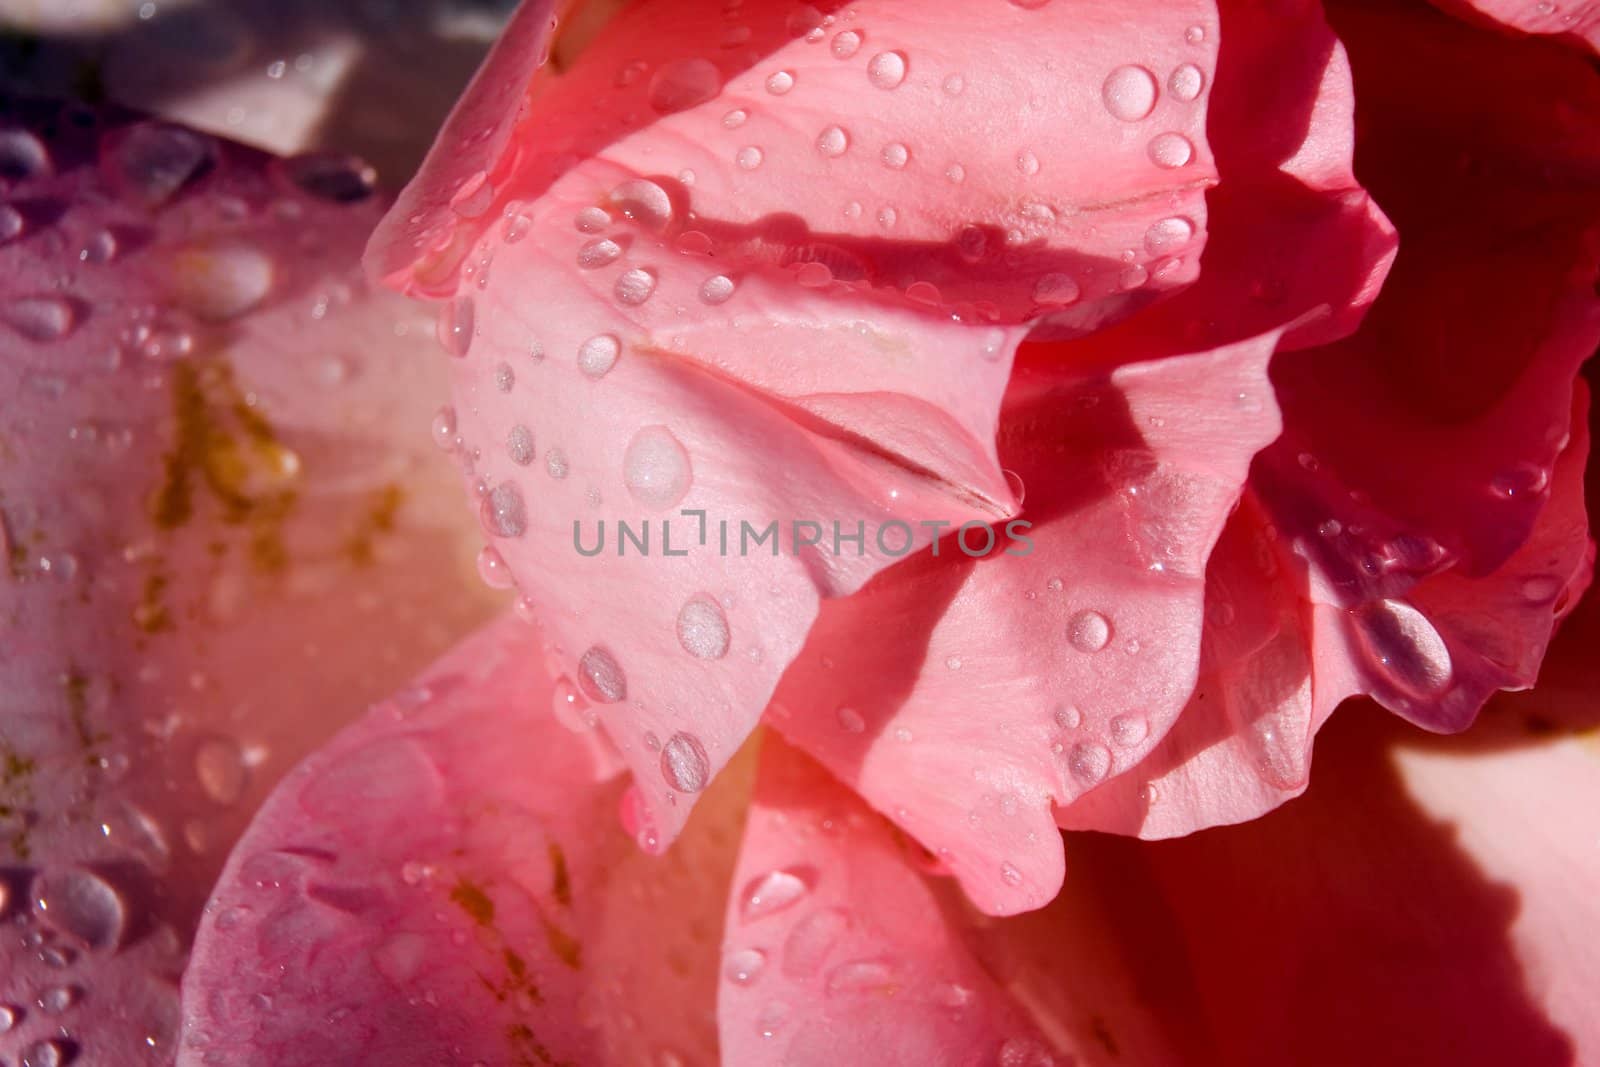 Petals with raindrops by Vladimir